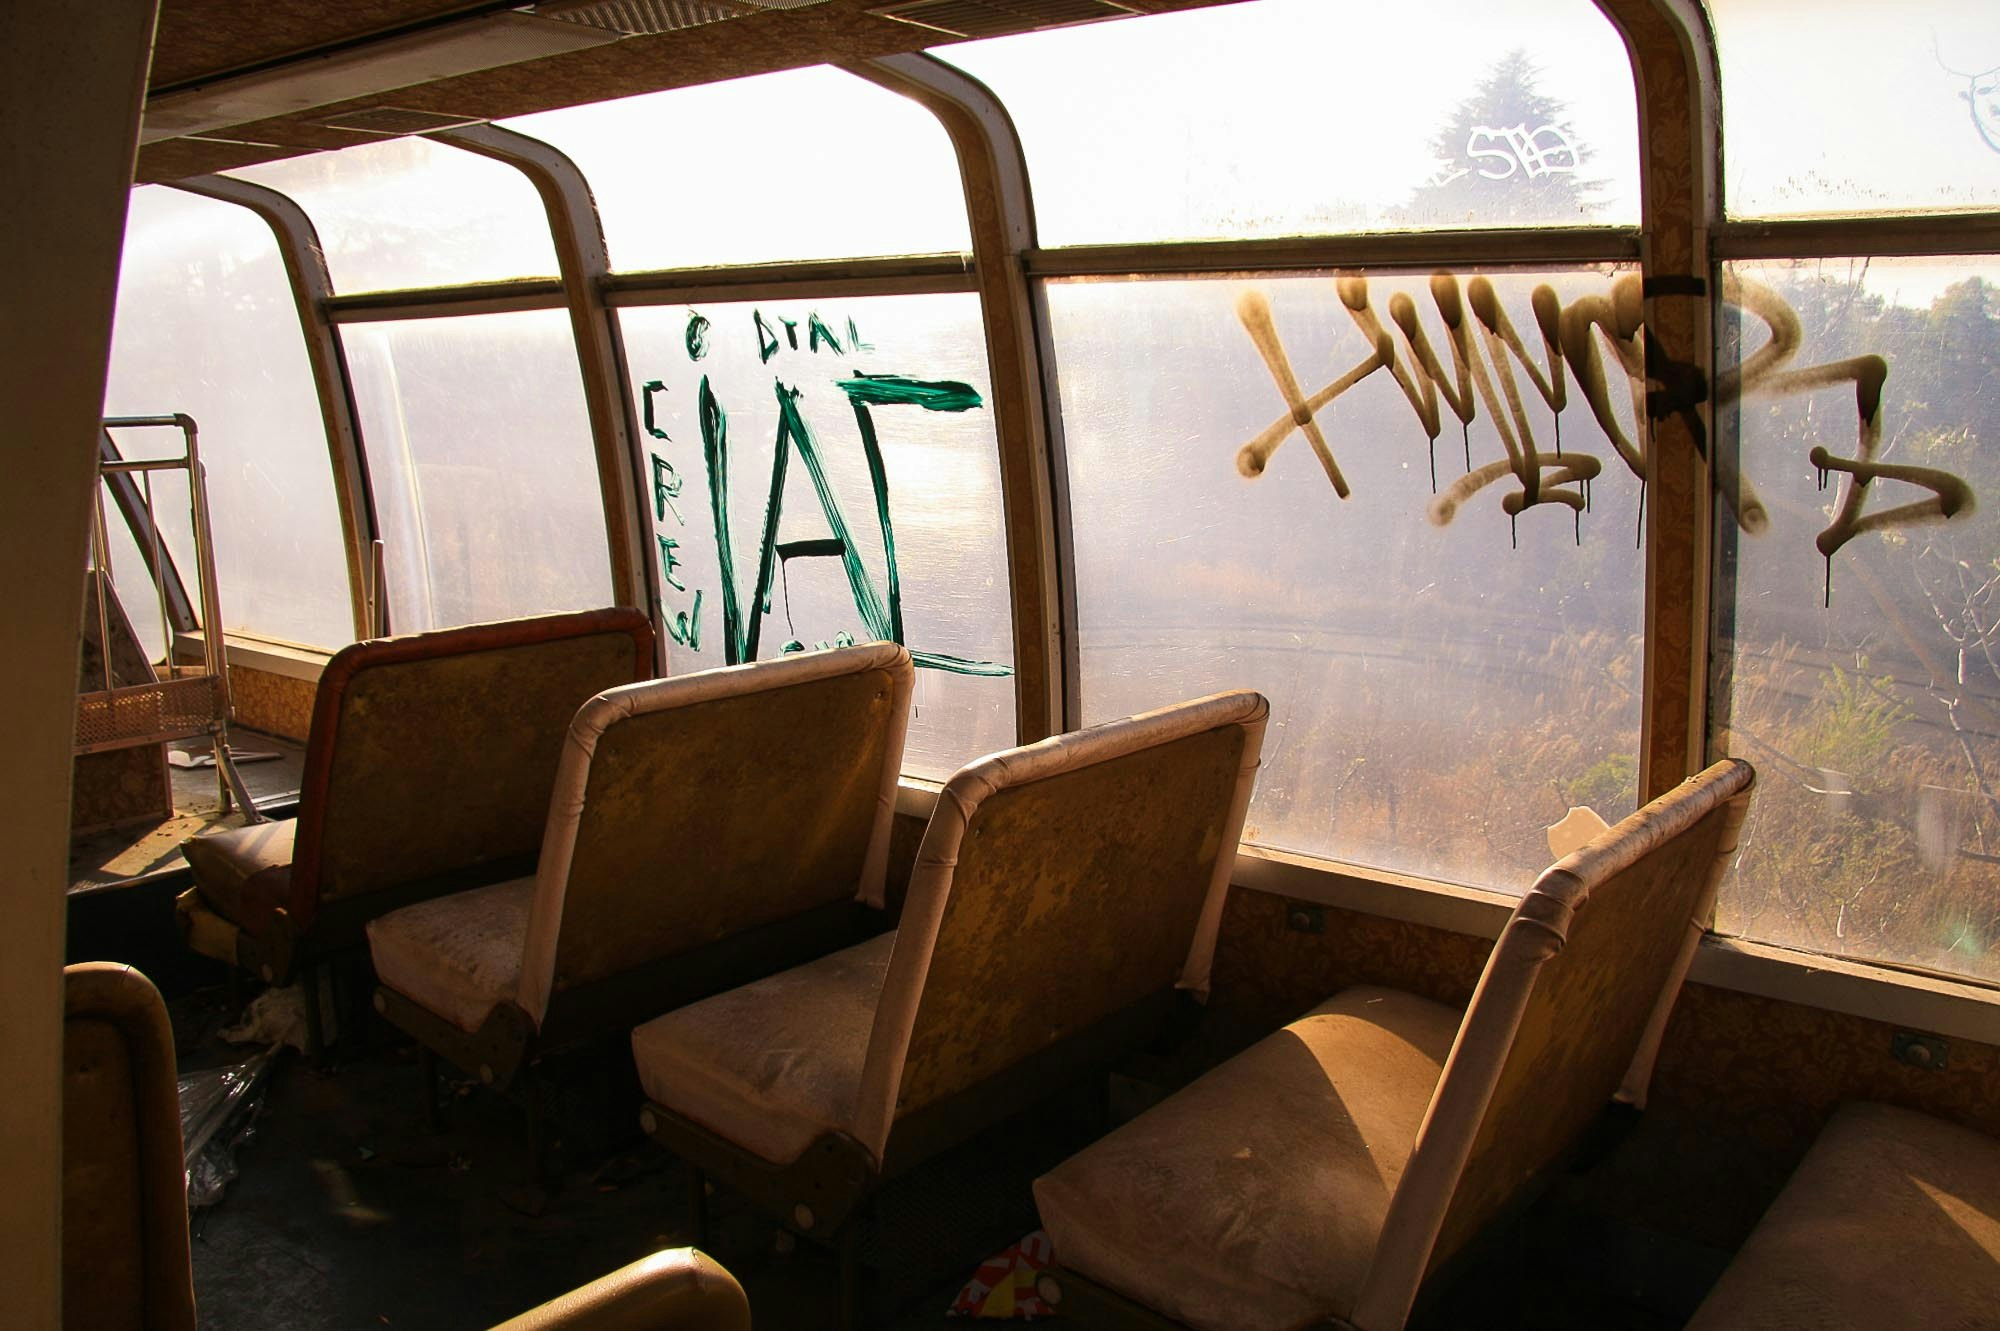 Graffiti on the outside of a bus in nara dreamland japan